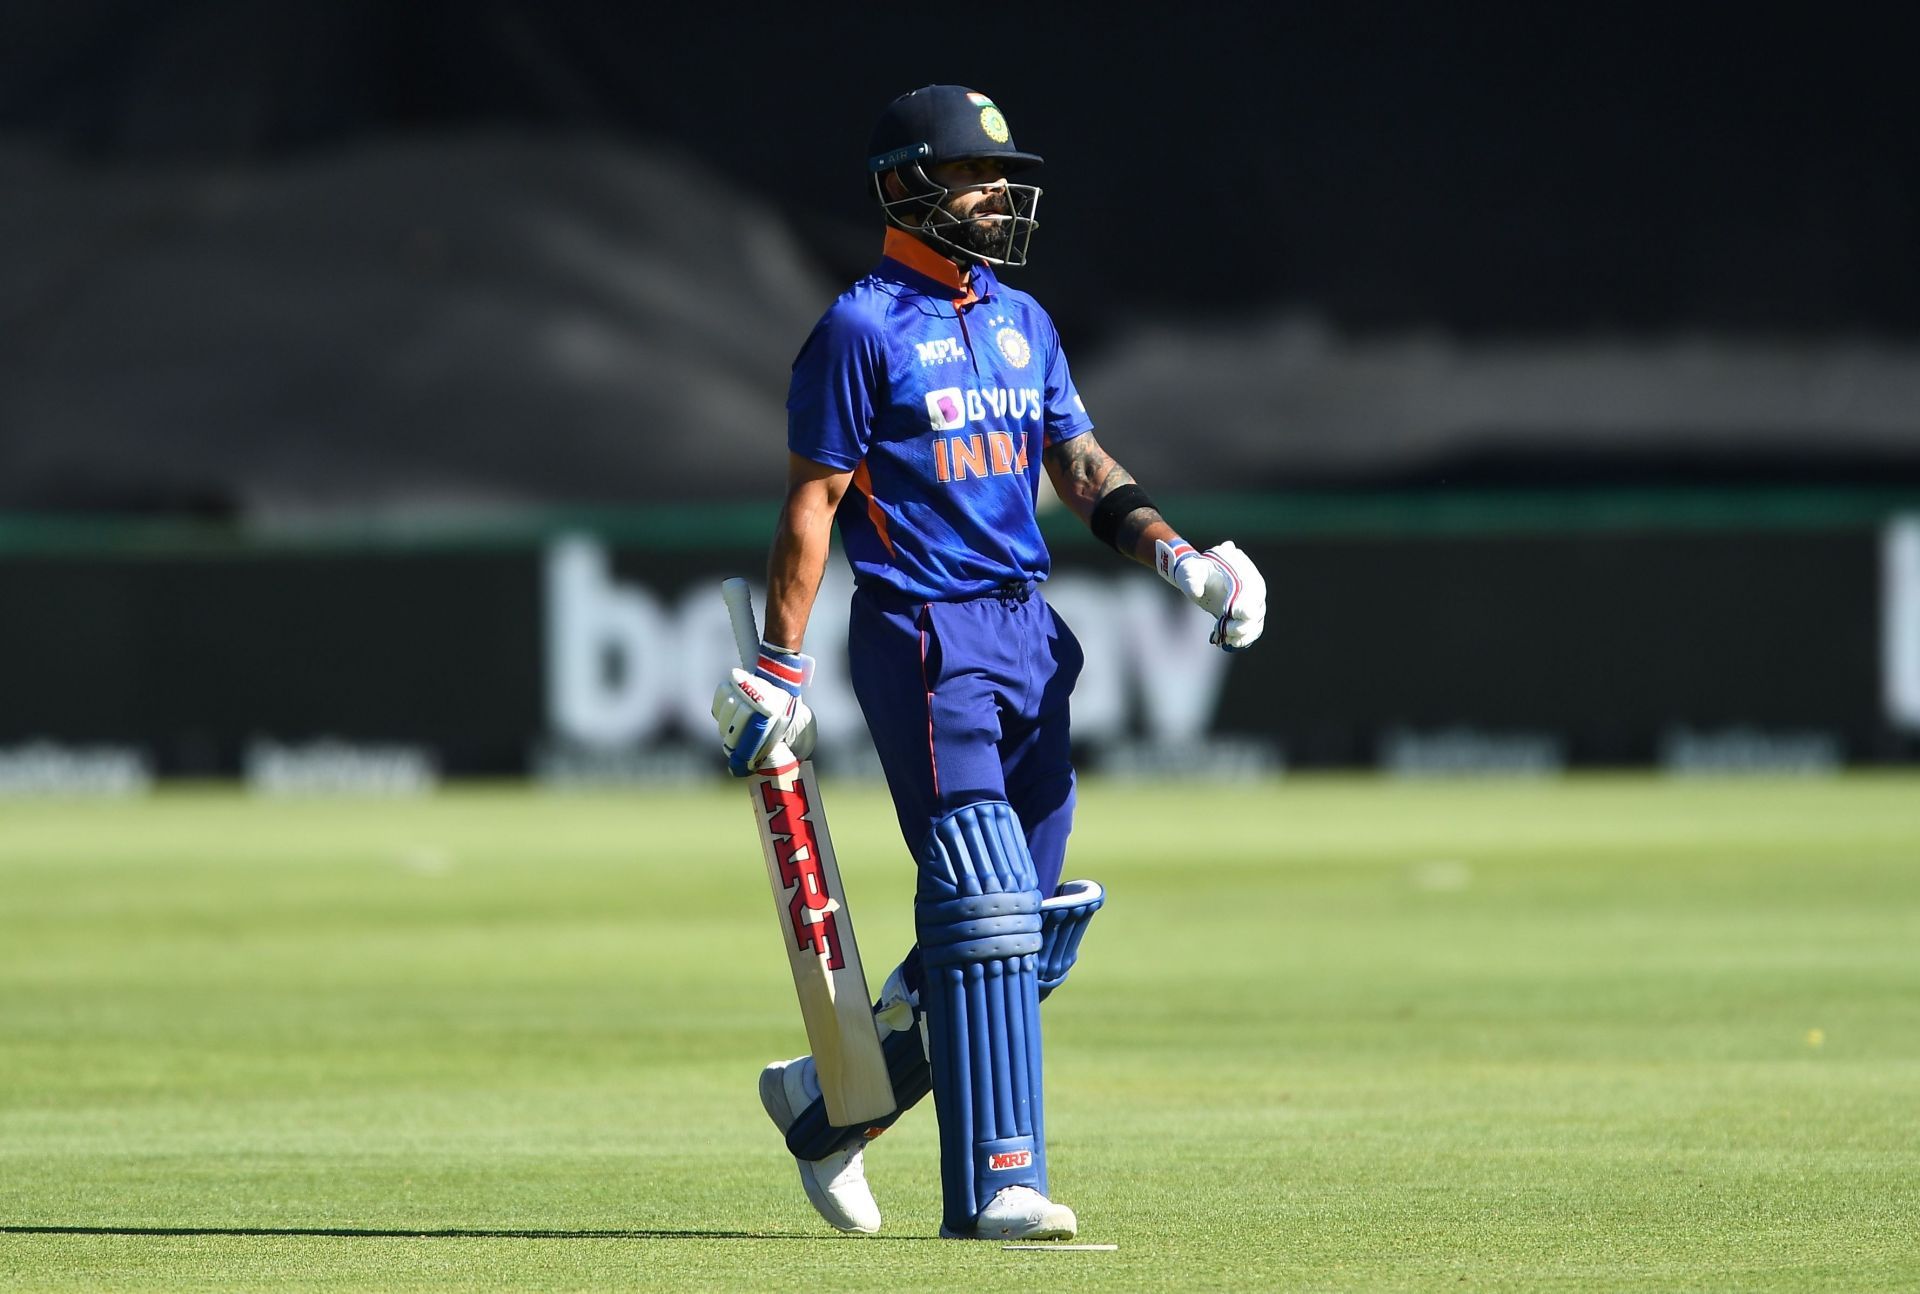 Virat Kohli was not at his fluent best in the ODI series against South Africa